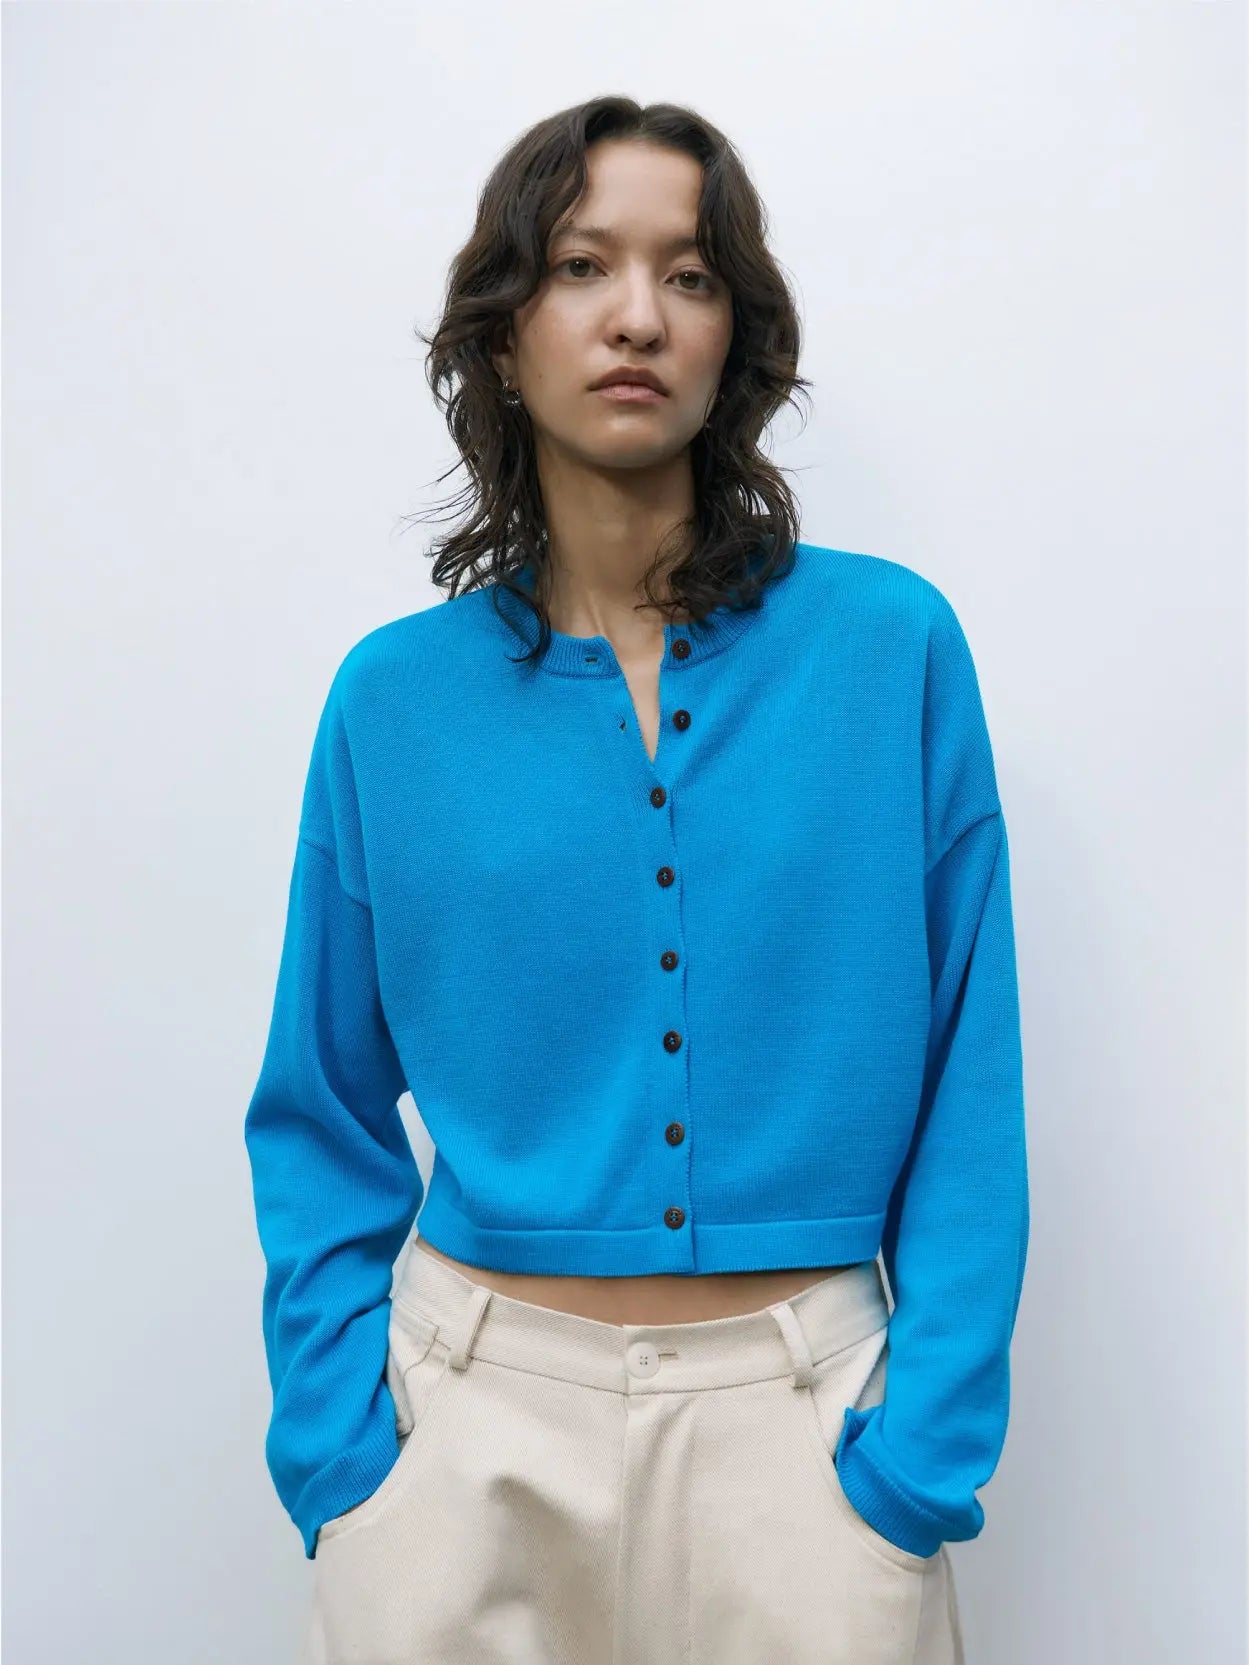 A bright blue, long-sleeve Cotton Cropped Cardigan Ceruleo with a round neckline and black buttons down the front, available exclusively at Bassalstore in Barcelona. The cardigan is displayed against a white background.